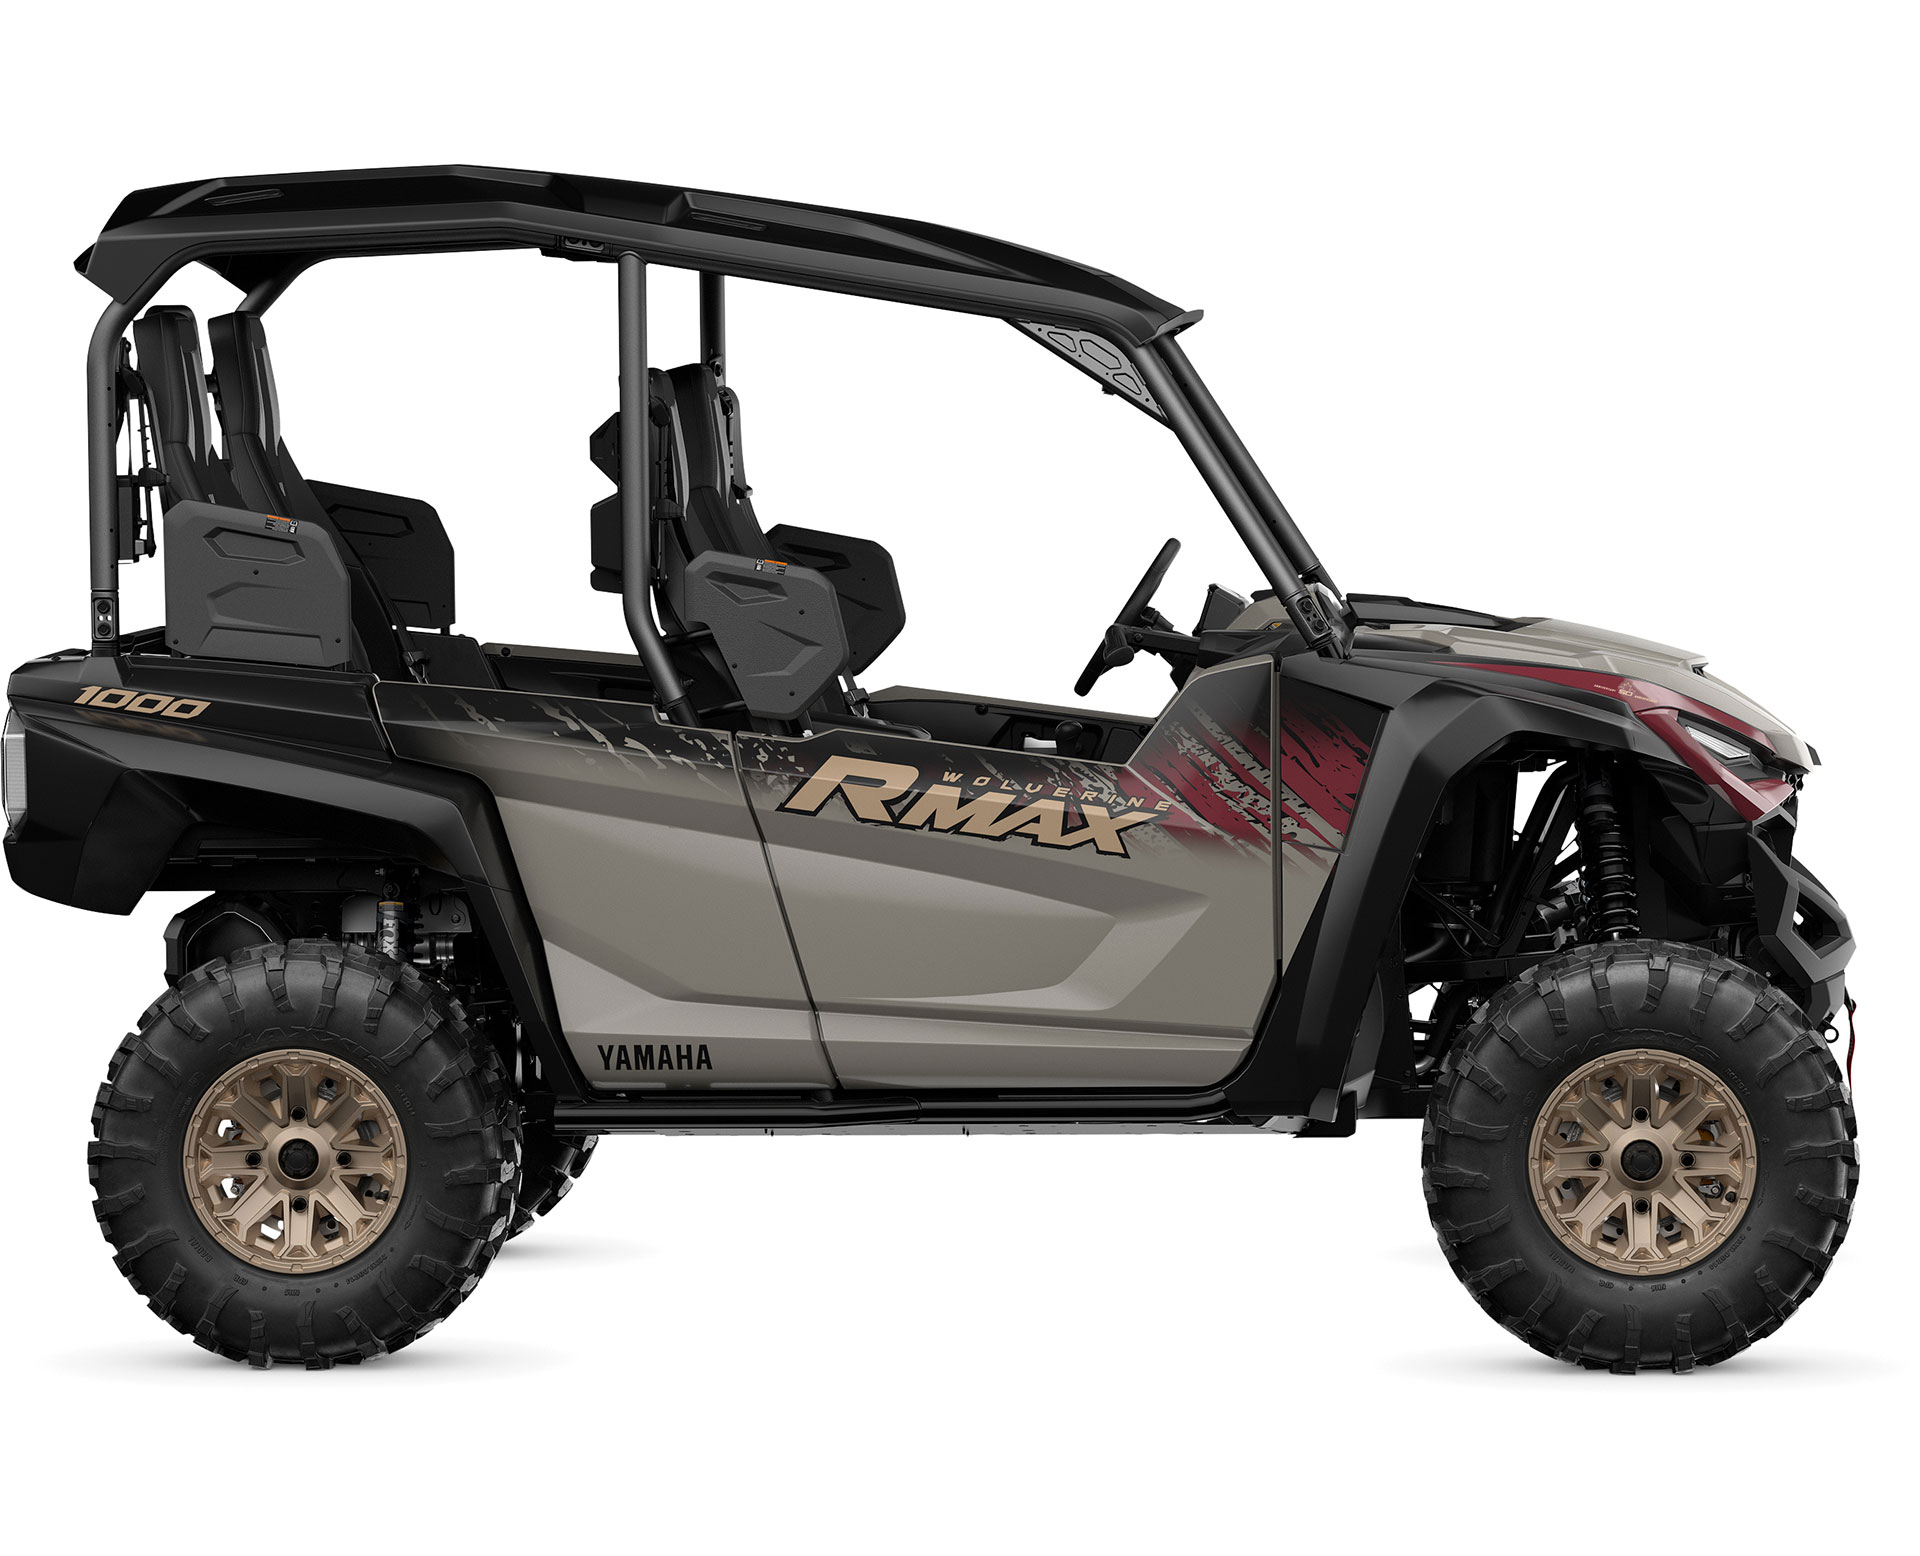 Thumbnail of your customized 2024 WOLVERINE® RMAX4™ 1000 SE